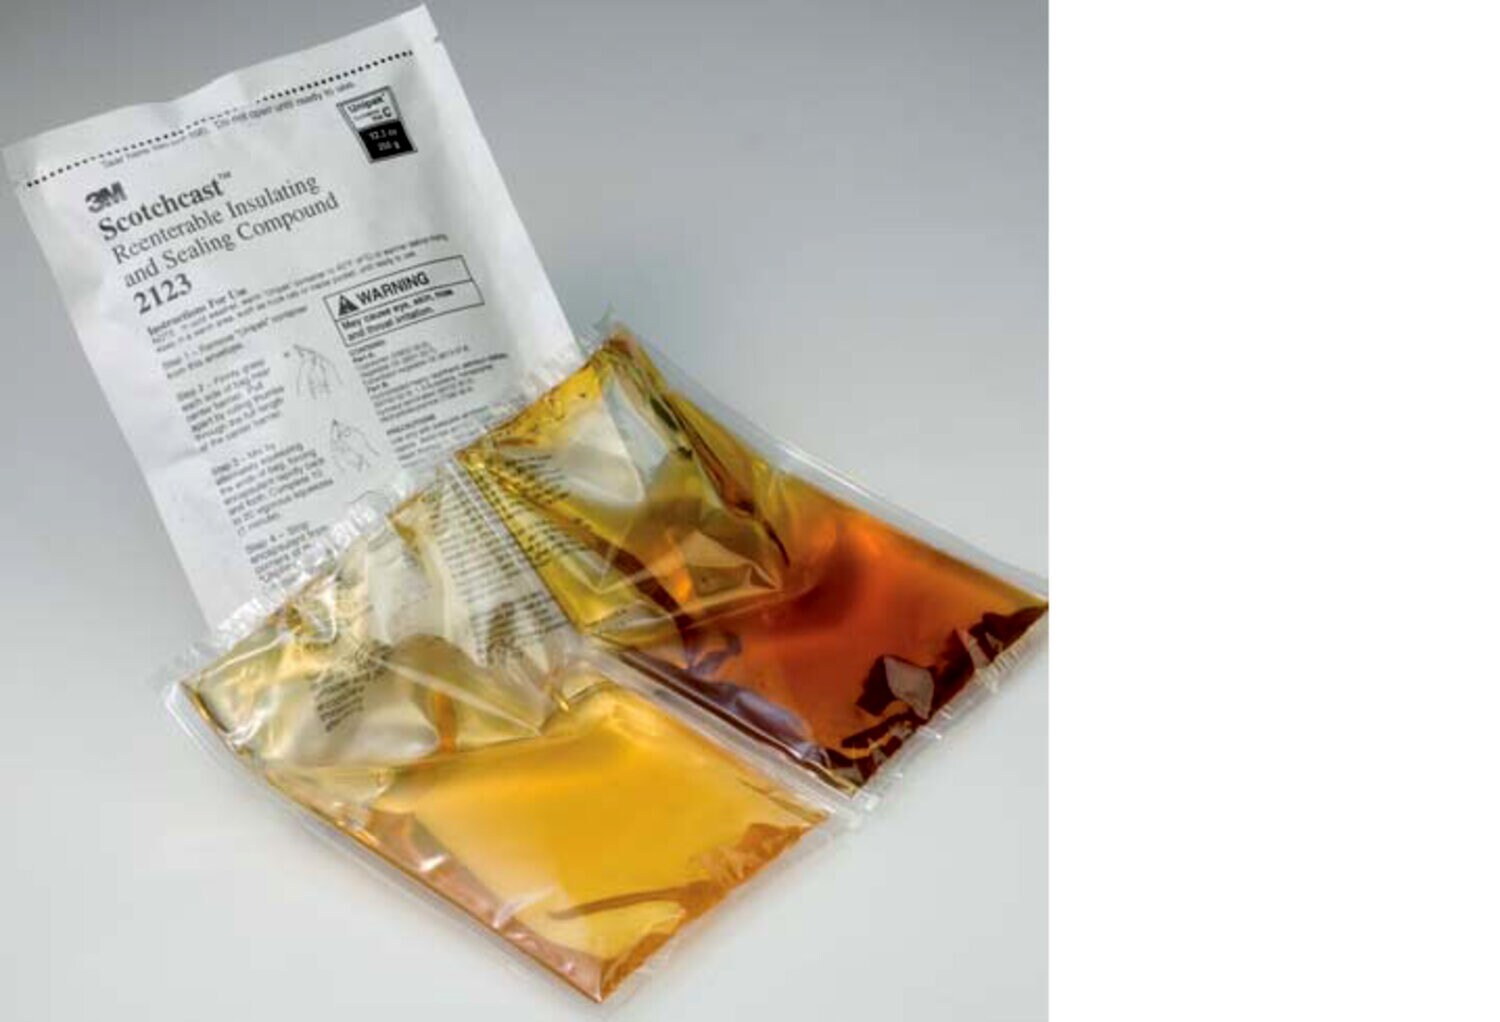 7100179825 - 3M Scotchcast Reenterable Electrical Insulating Resin 2123D (21.2 oz)
Size A, 10/Case